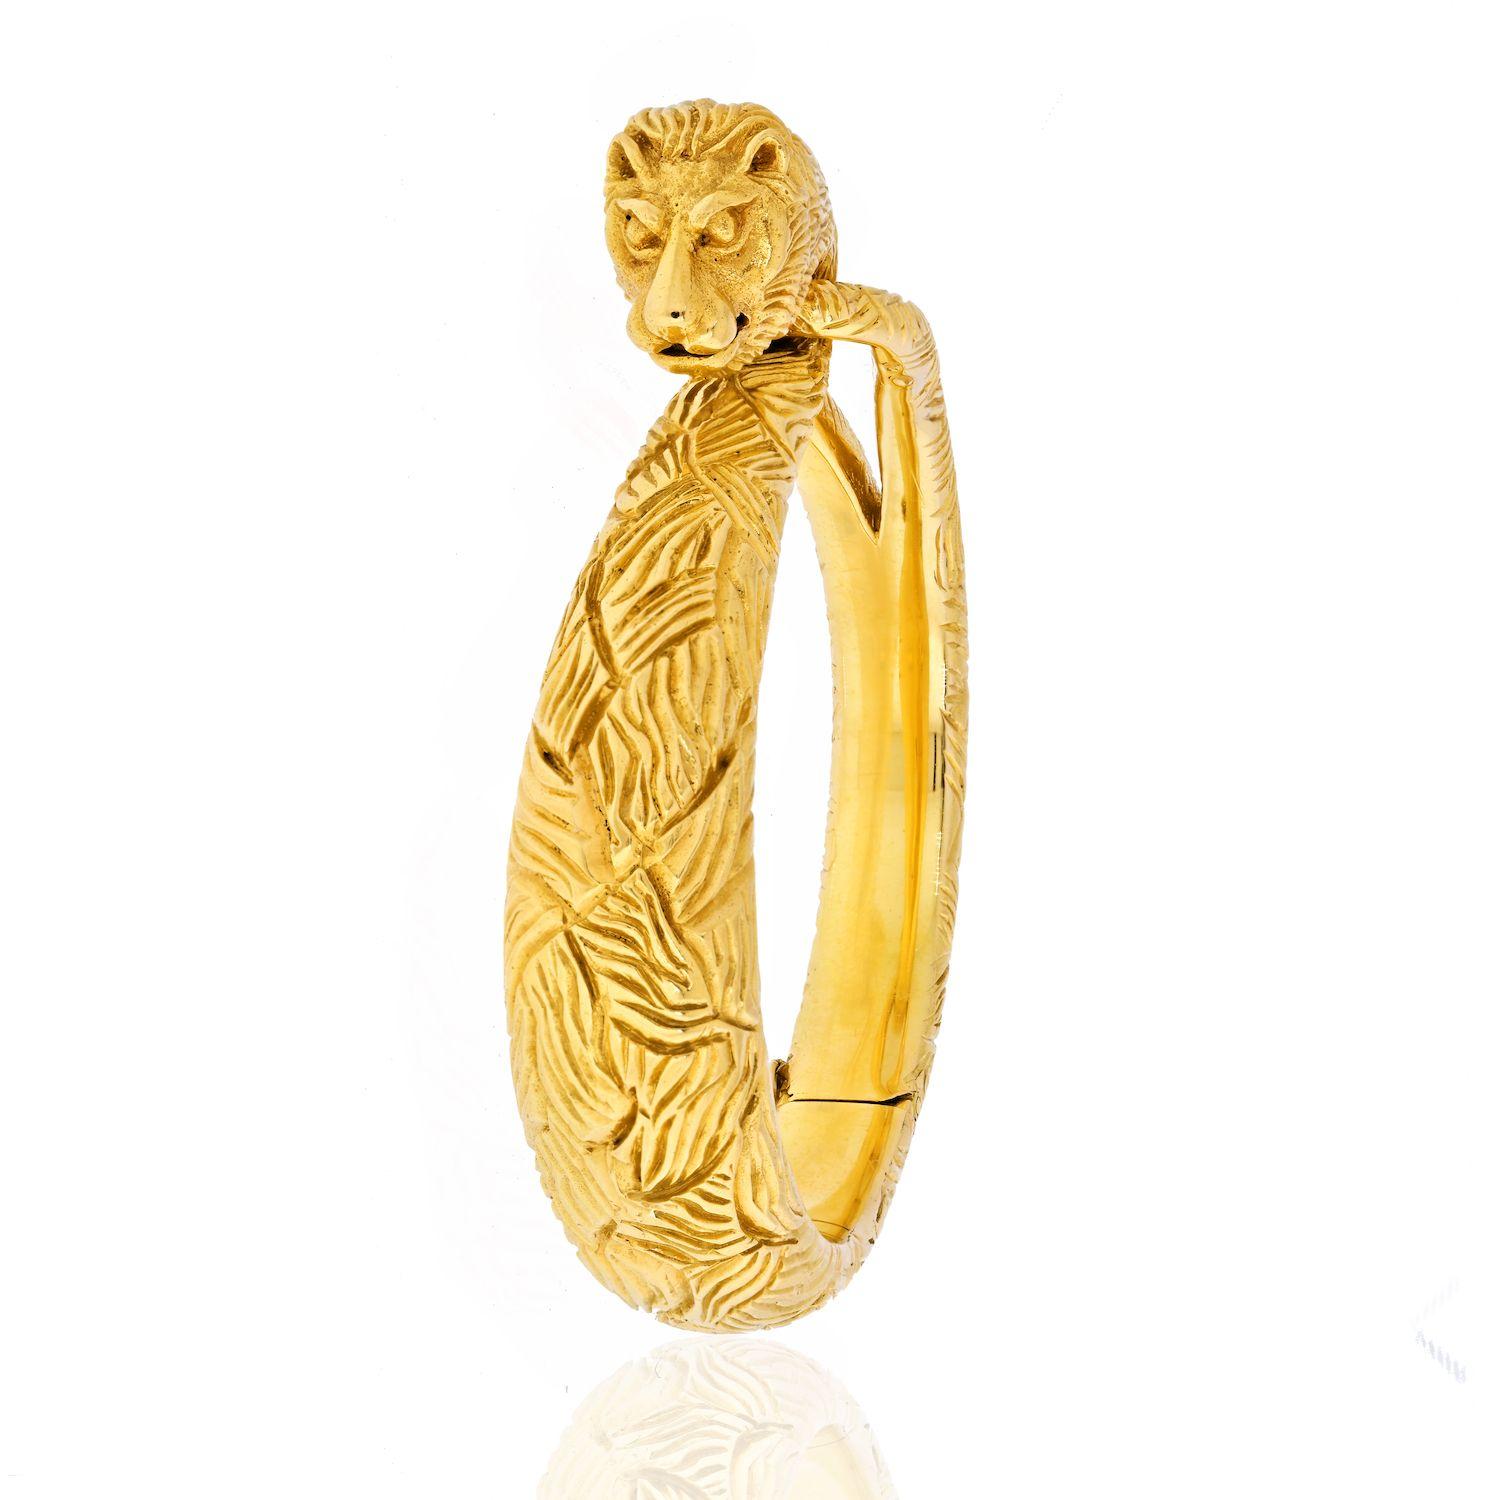 Cartier 18K Yellow Gold Lion Bangle

King Edward VII famously dubbed Cartier “the jeweler of kings and the king of jewelers”. This is in no way an exaggeration. On top of providing the British monarch with 27 tiaras for his coronation in 1902,